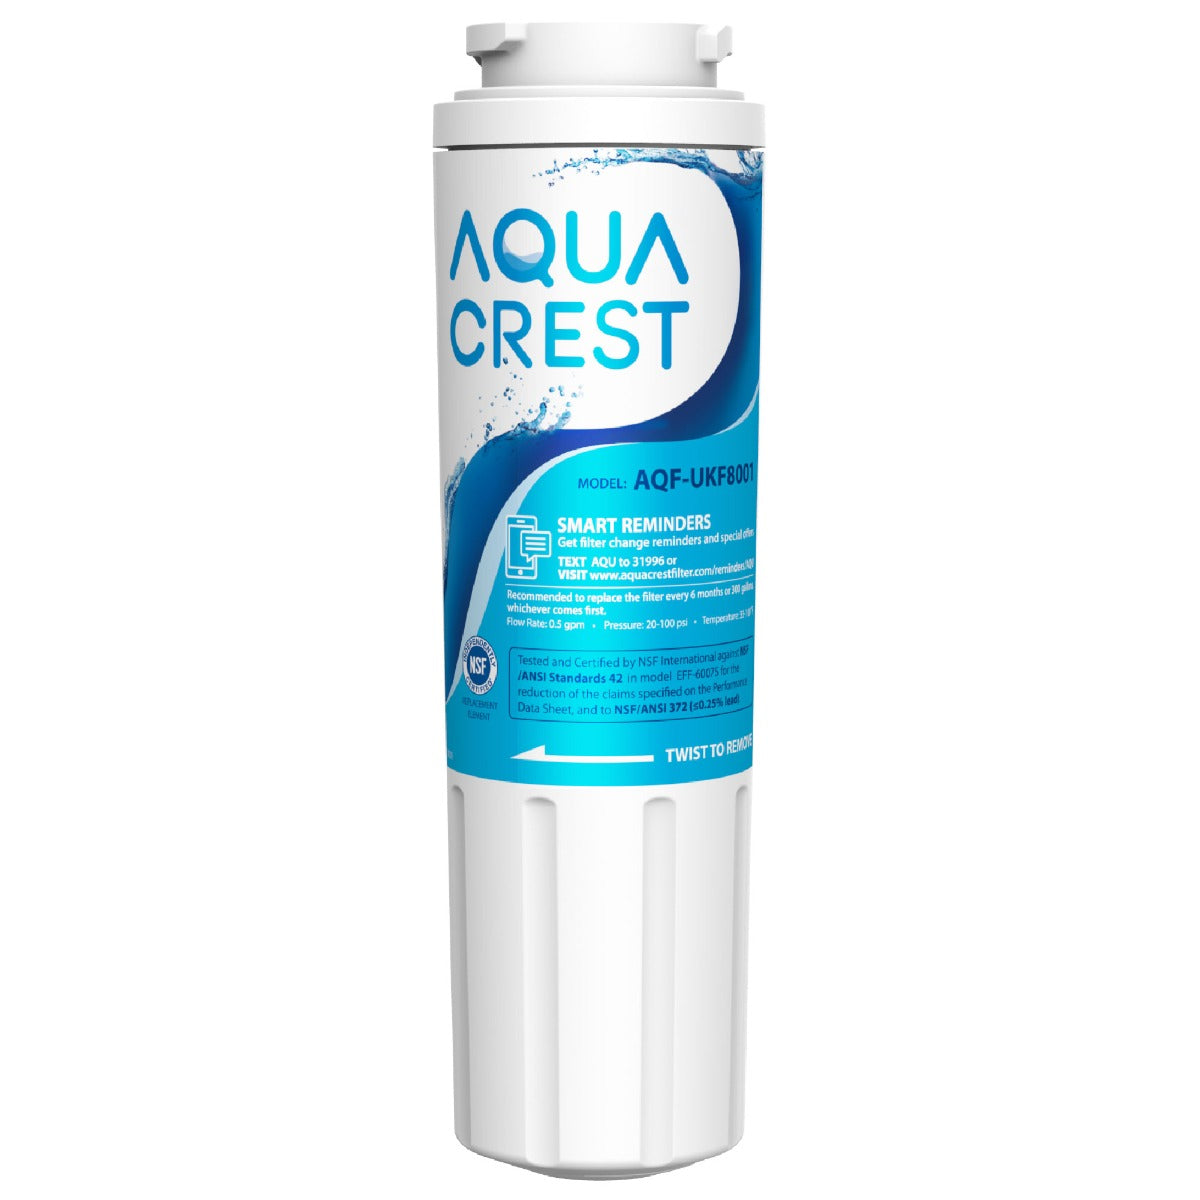 AQUACREST Replacement for EveryDrop Filter 4, Maytag UKF8001 Refrigerator Water Filter